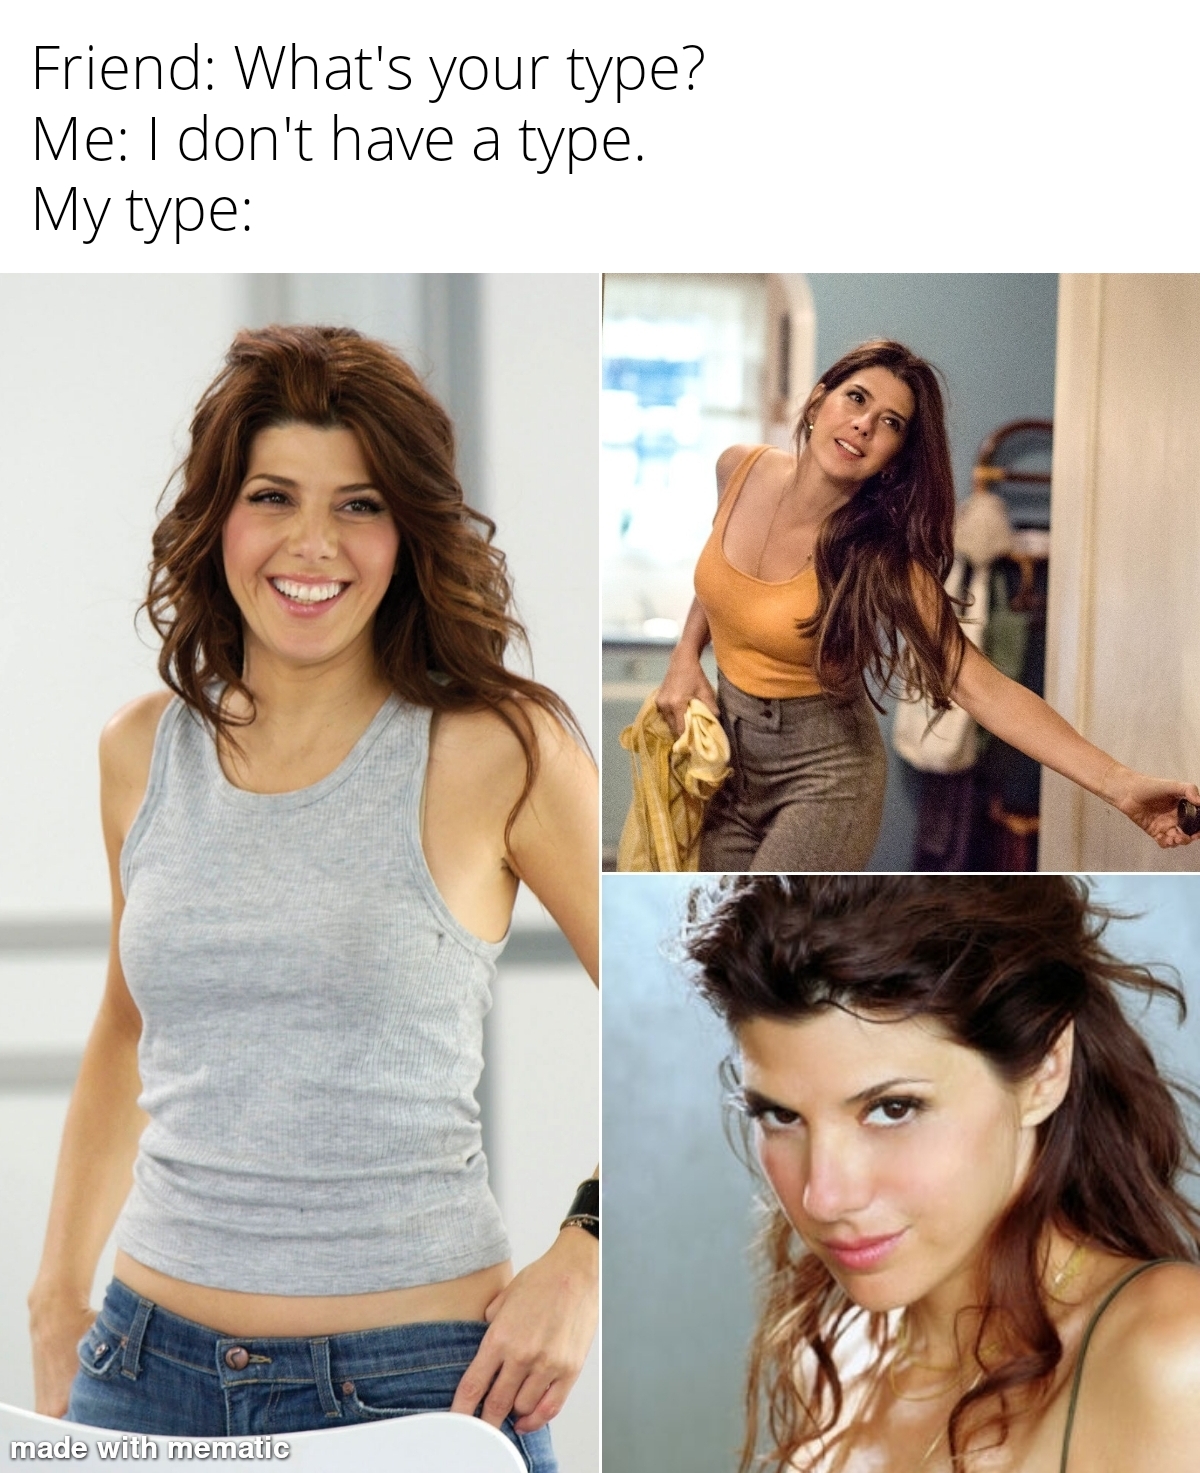 dank memes - marisa tomei hot - Friend What's your type? Me I don't have a type. My type made with mematic